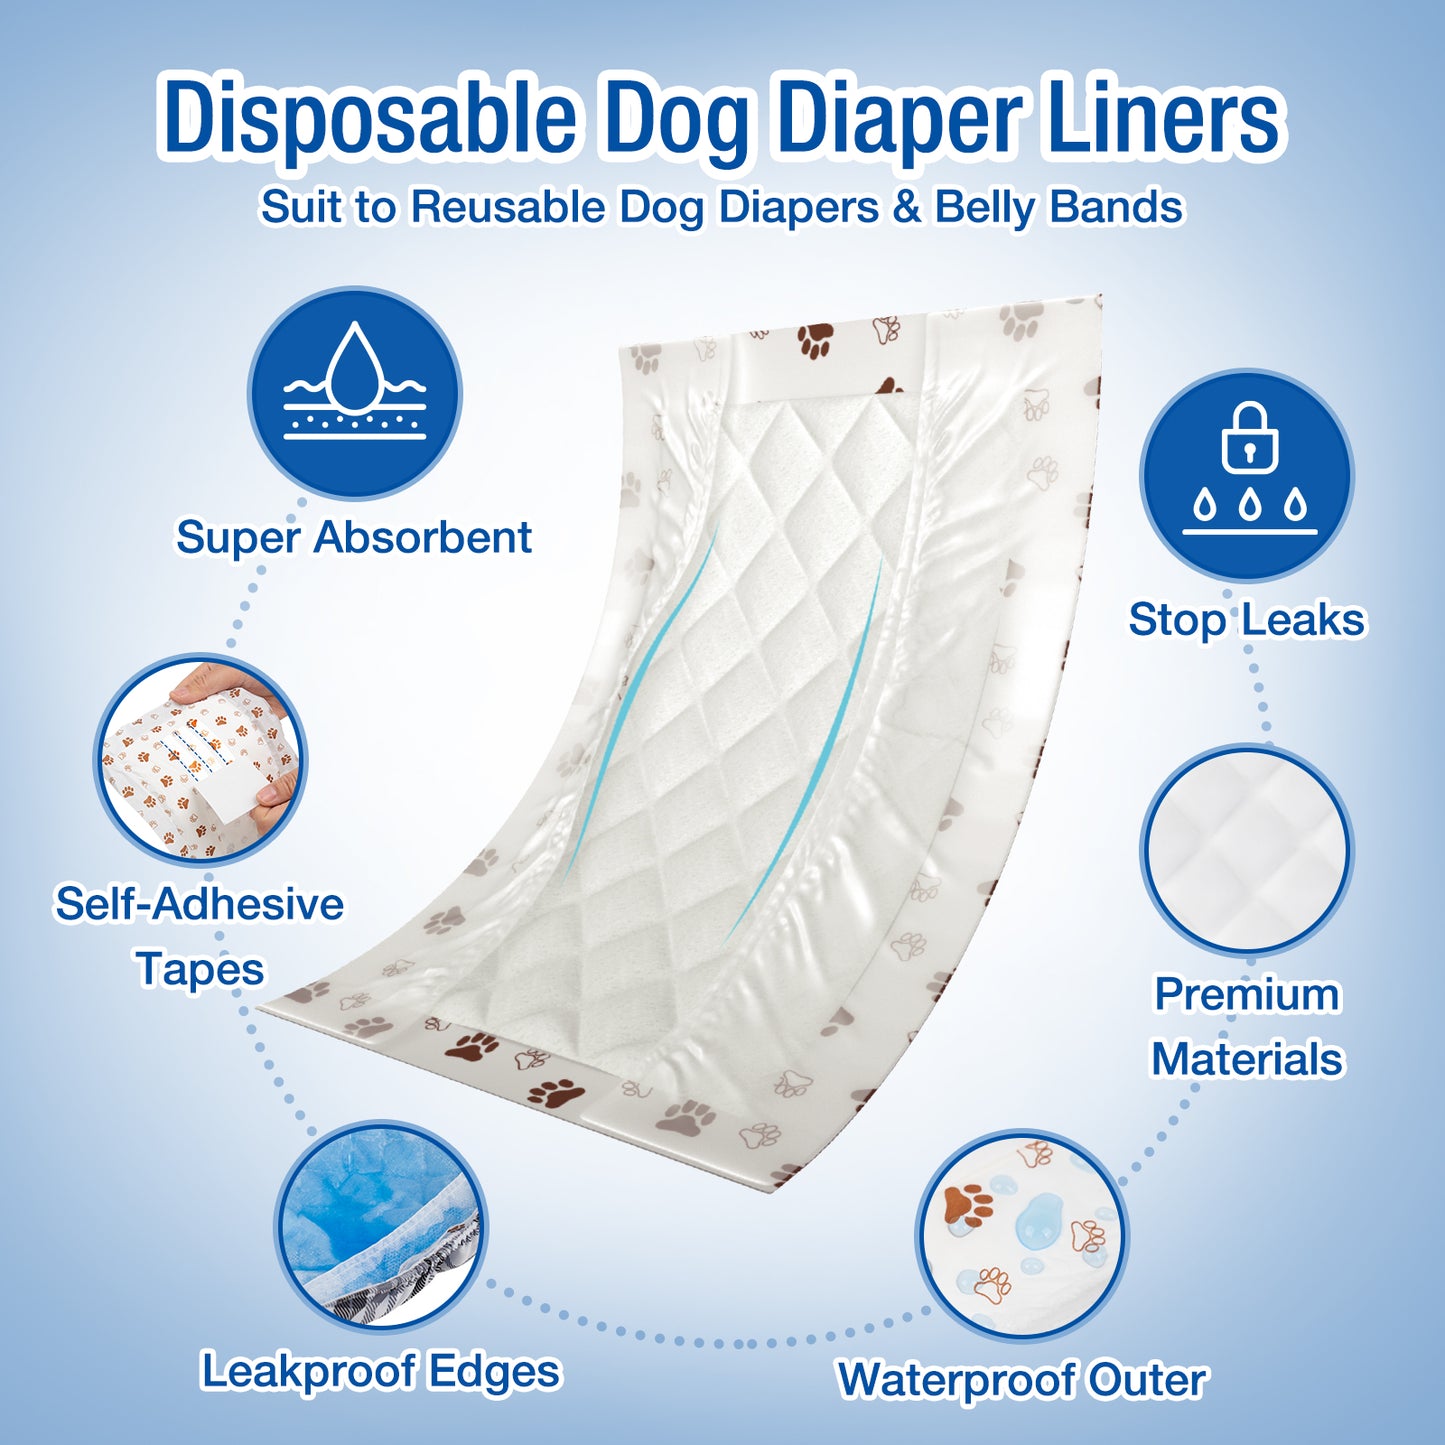 Disposable Dog Diaper Liners, Fit Most Dog Wraps and Belly Bands, Up-graded, Brown, 1 Pack